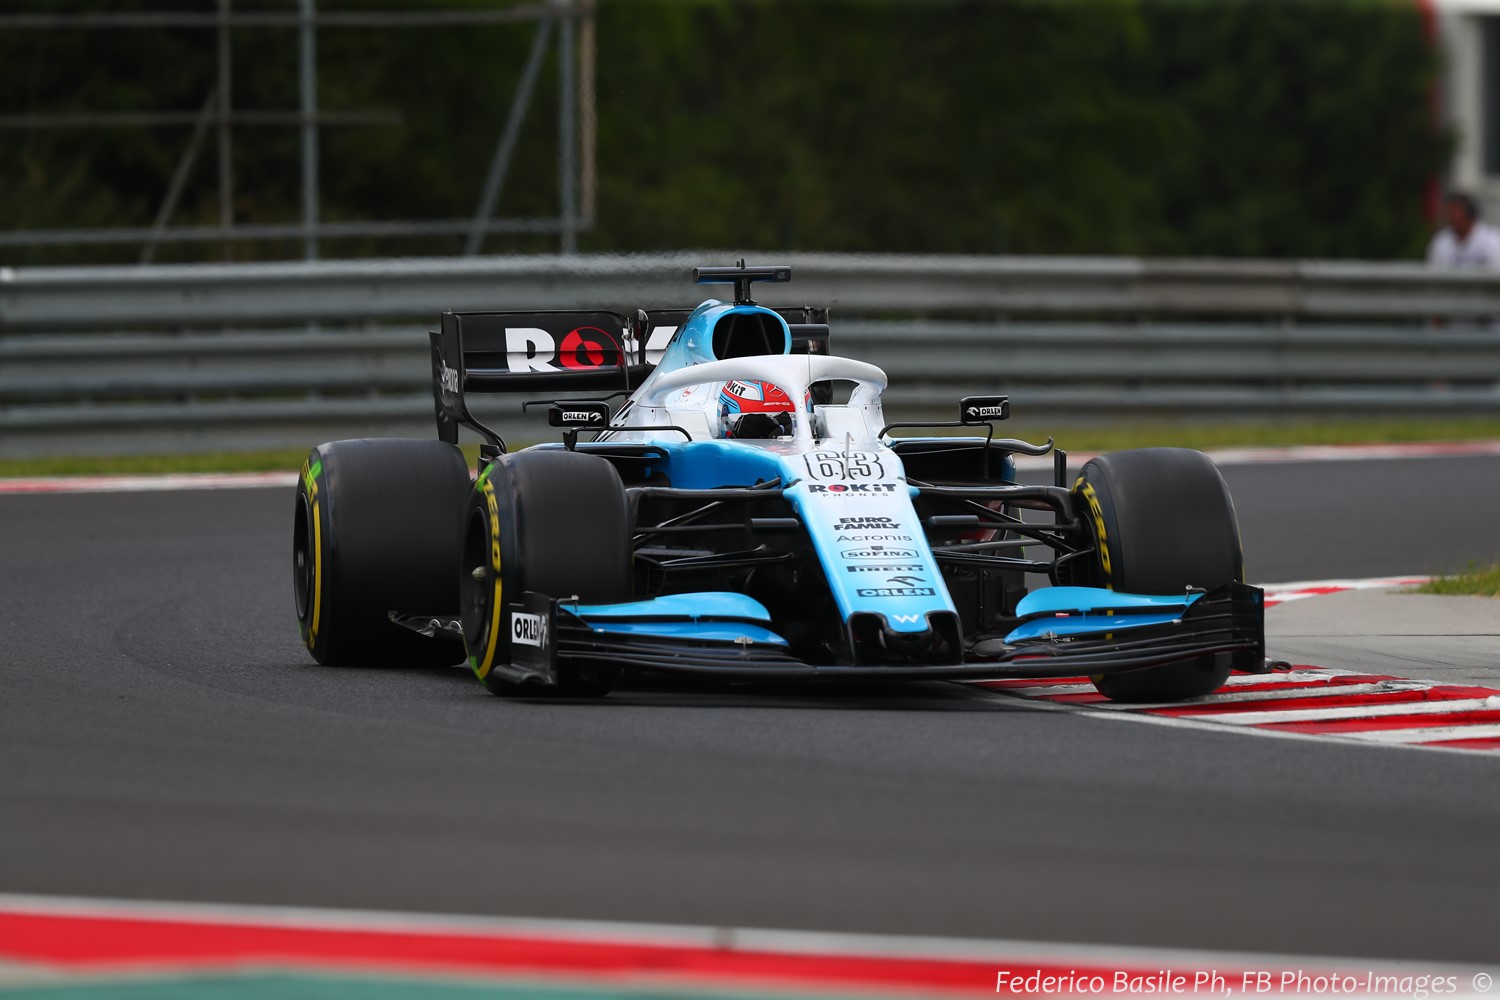 Russell finally pulled Williams off the back of the grid with an impressive qualifying in Hungary